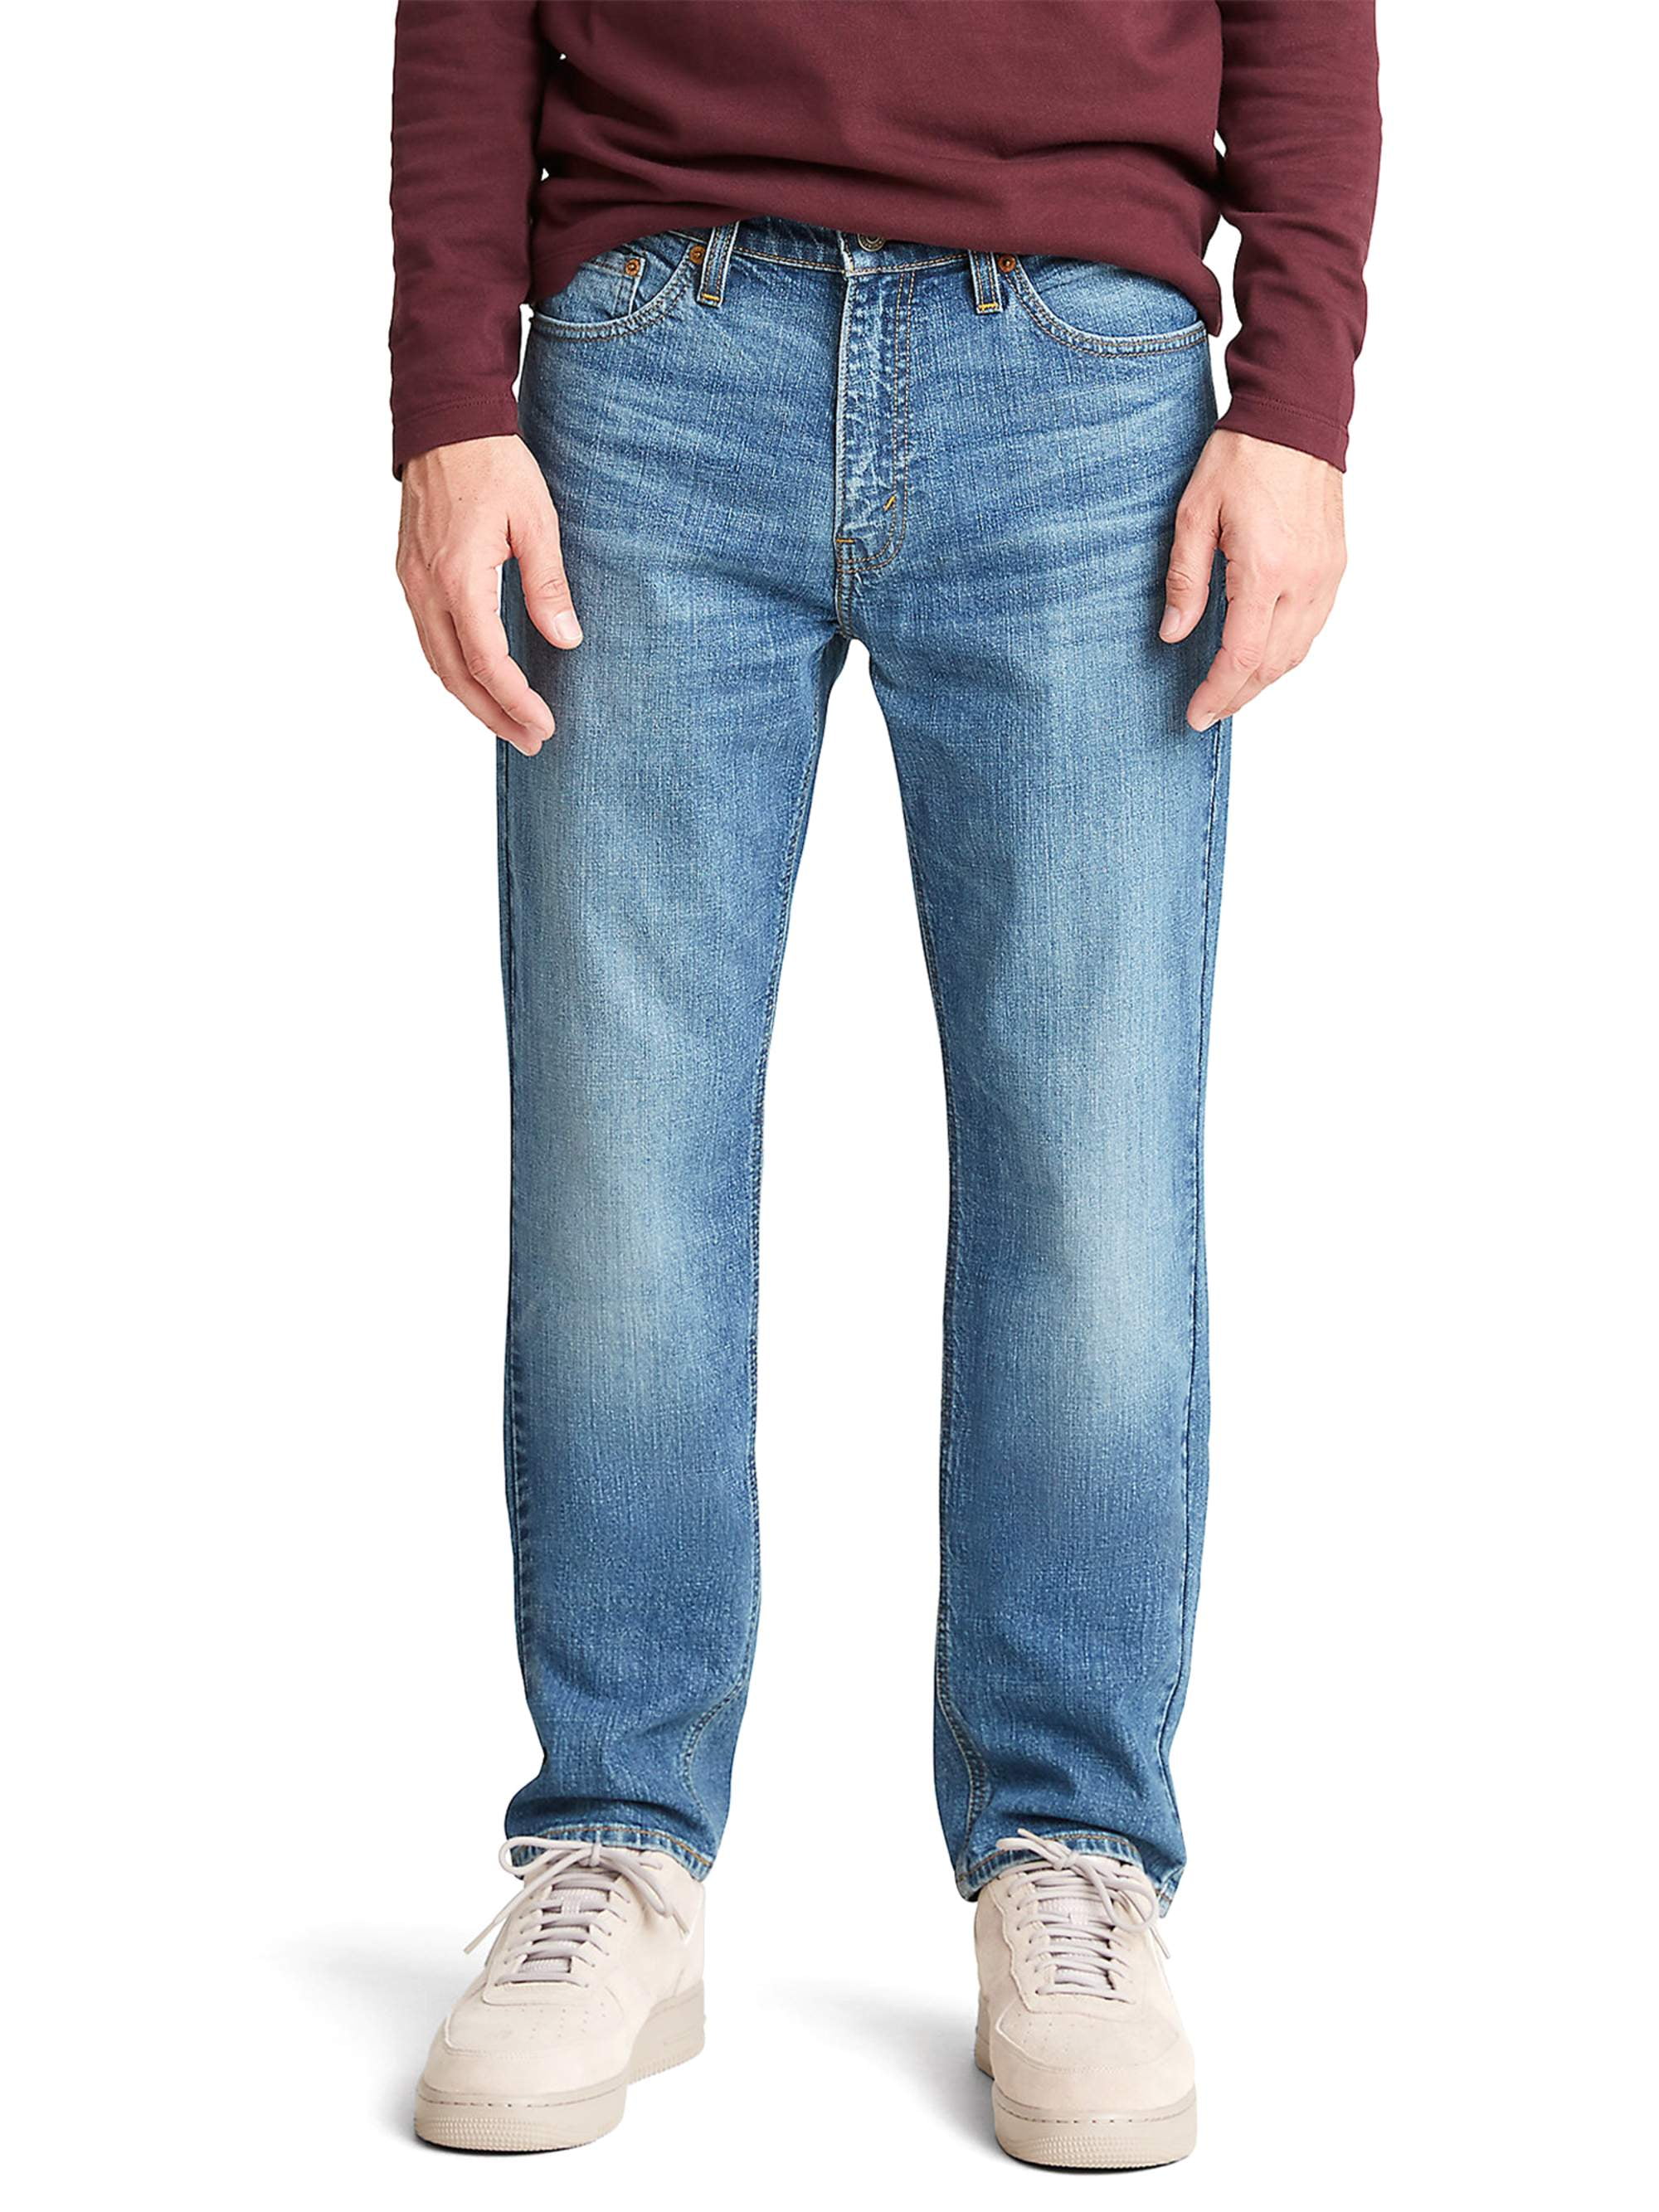 levi strauss athletic fit jeans